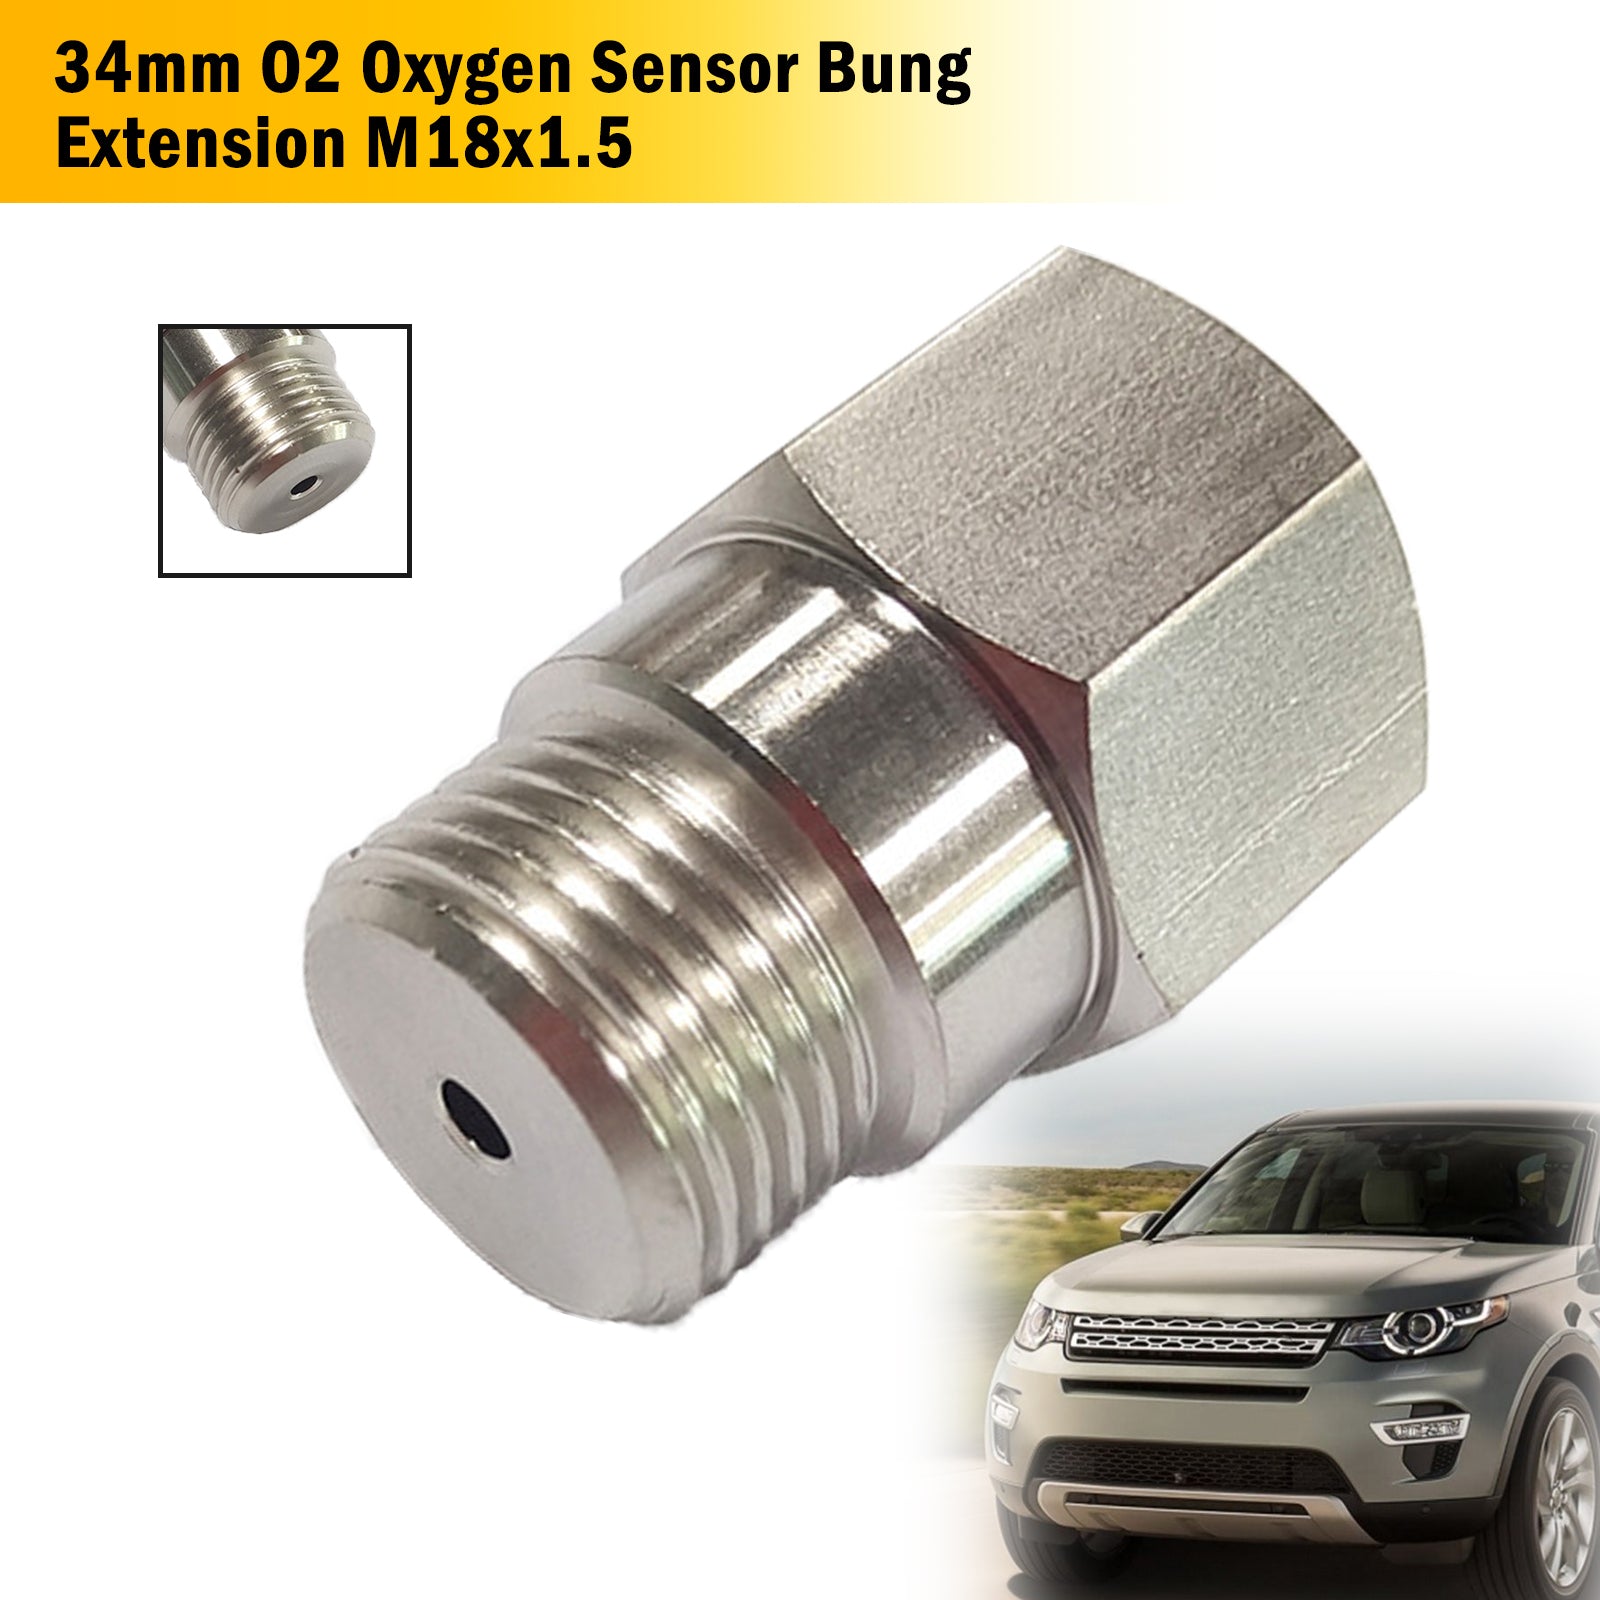 M18x1.5 Bung 34mm O2 Oxygen Sensor Test Pipe Extension Extender Adapter Spacer